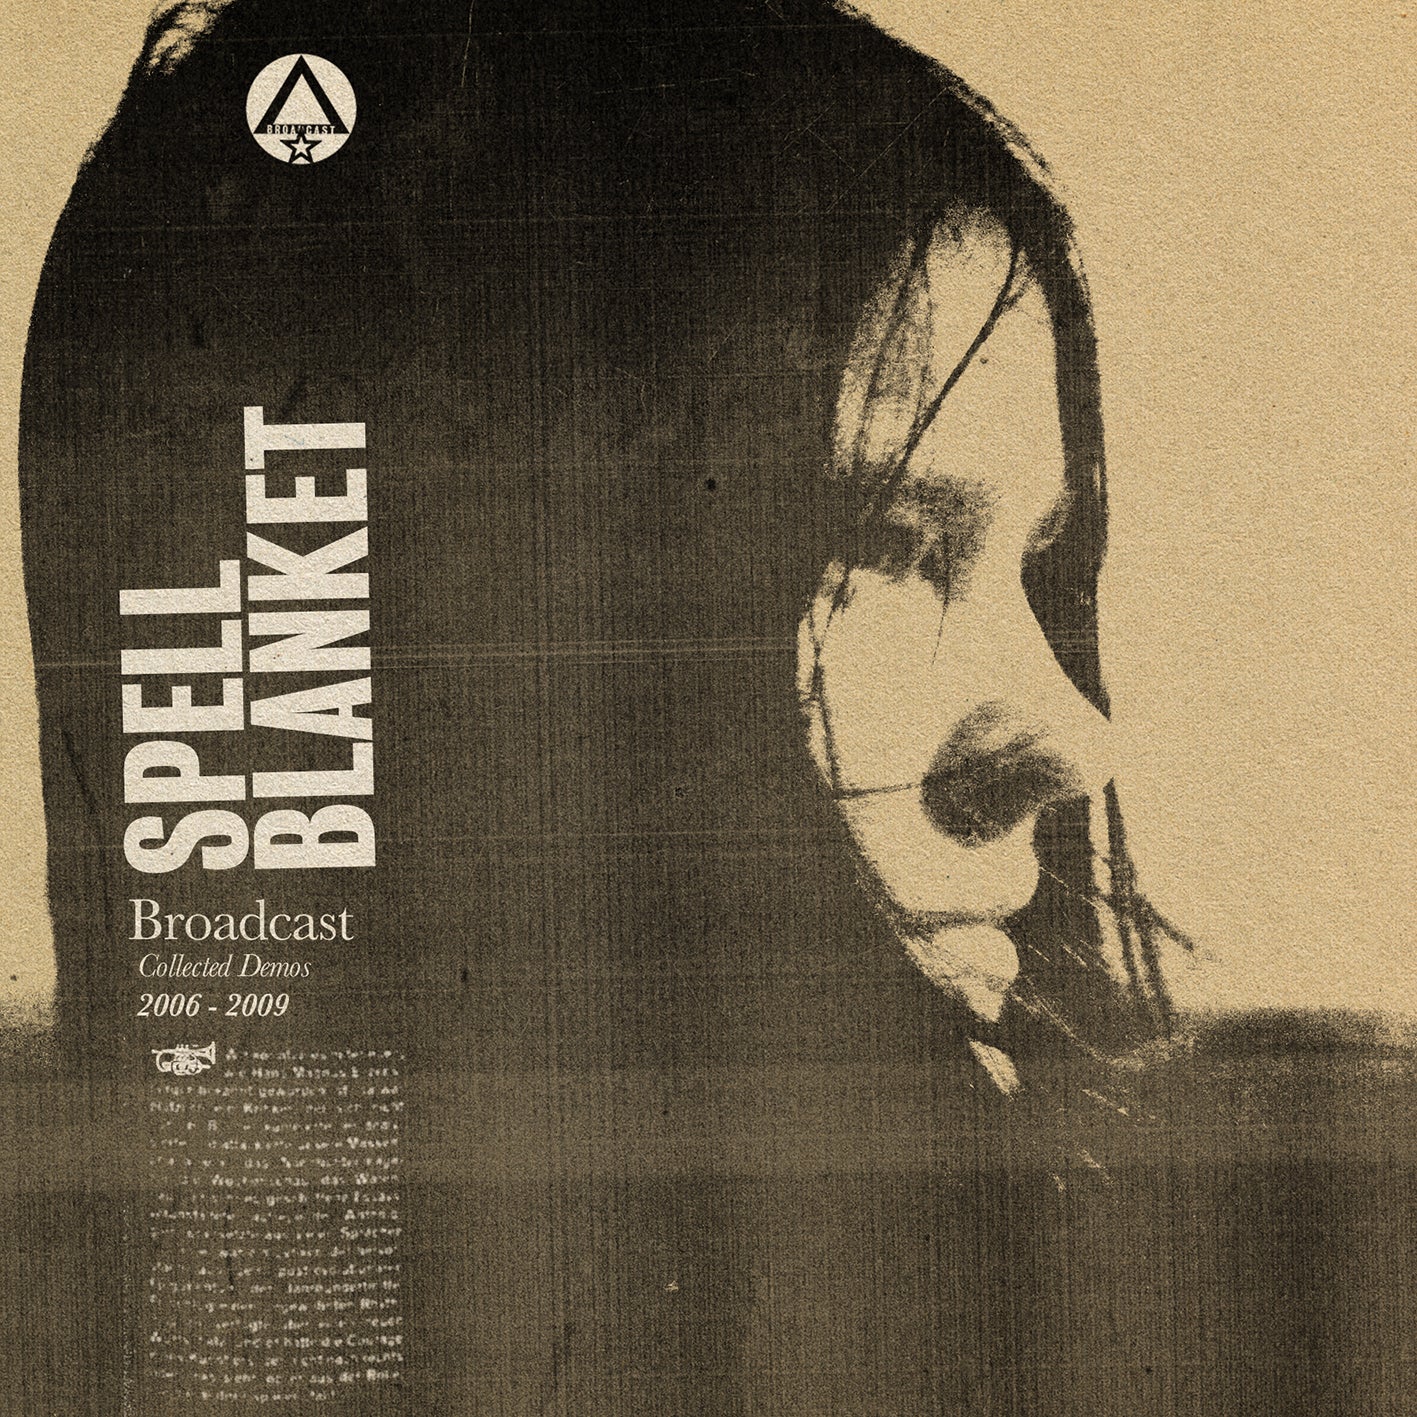 Broadcast - Spell Blanket - Collected Demos 2006-2009: CD